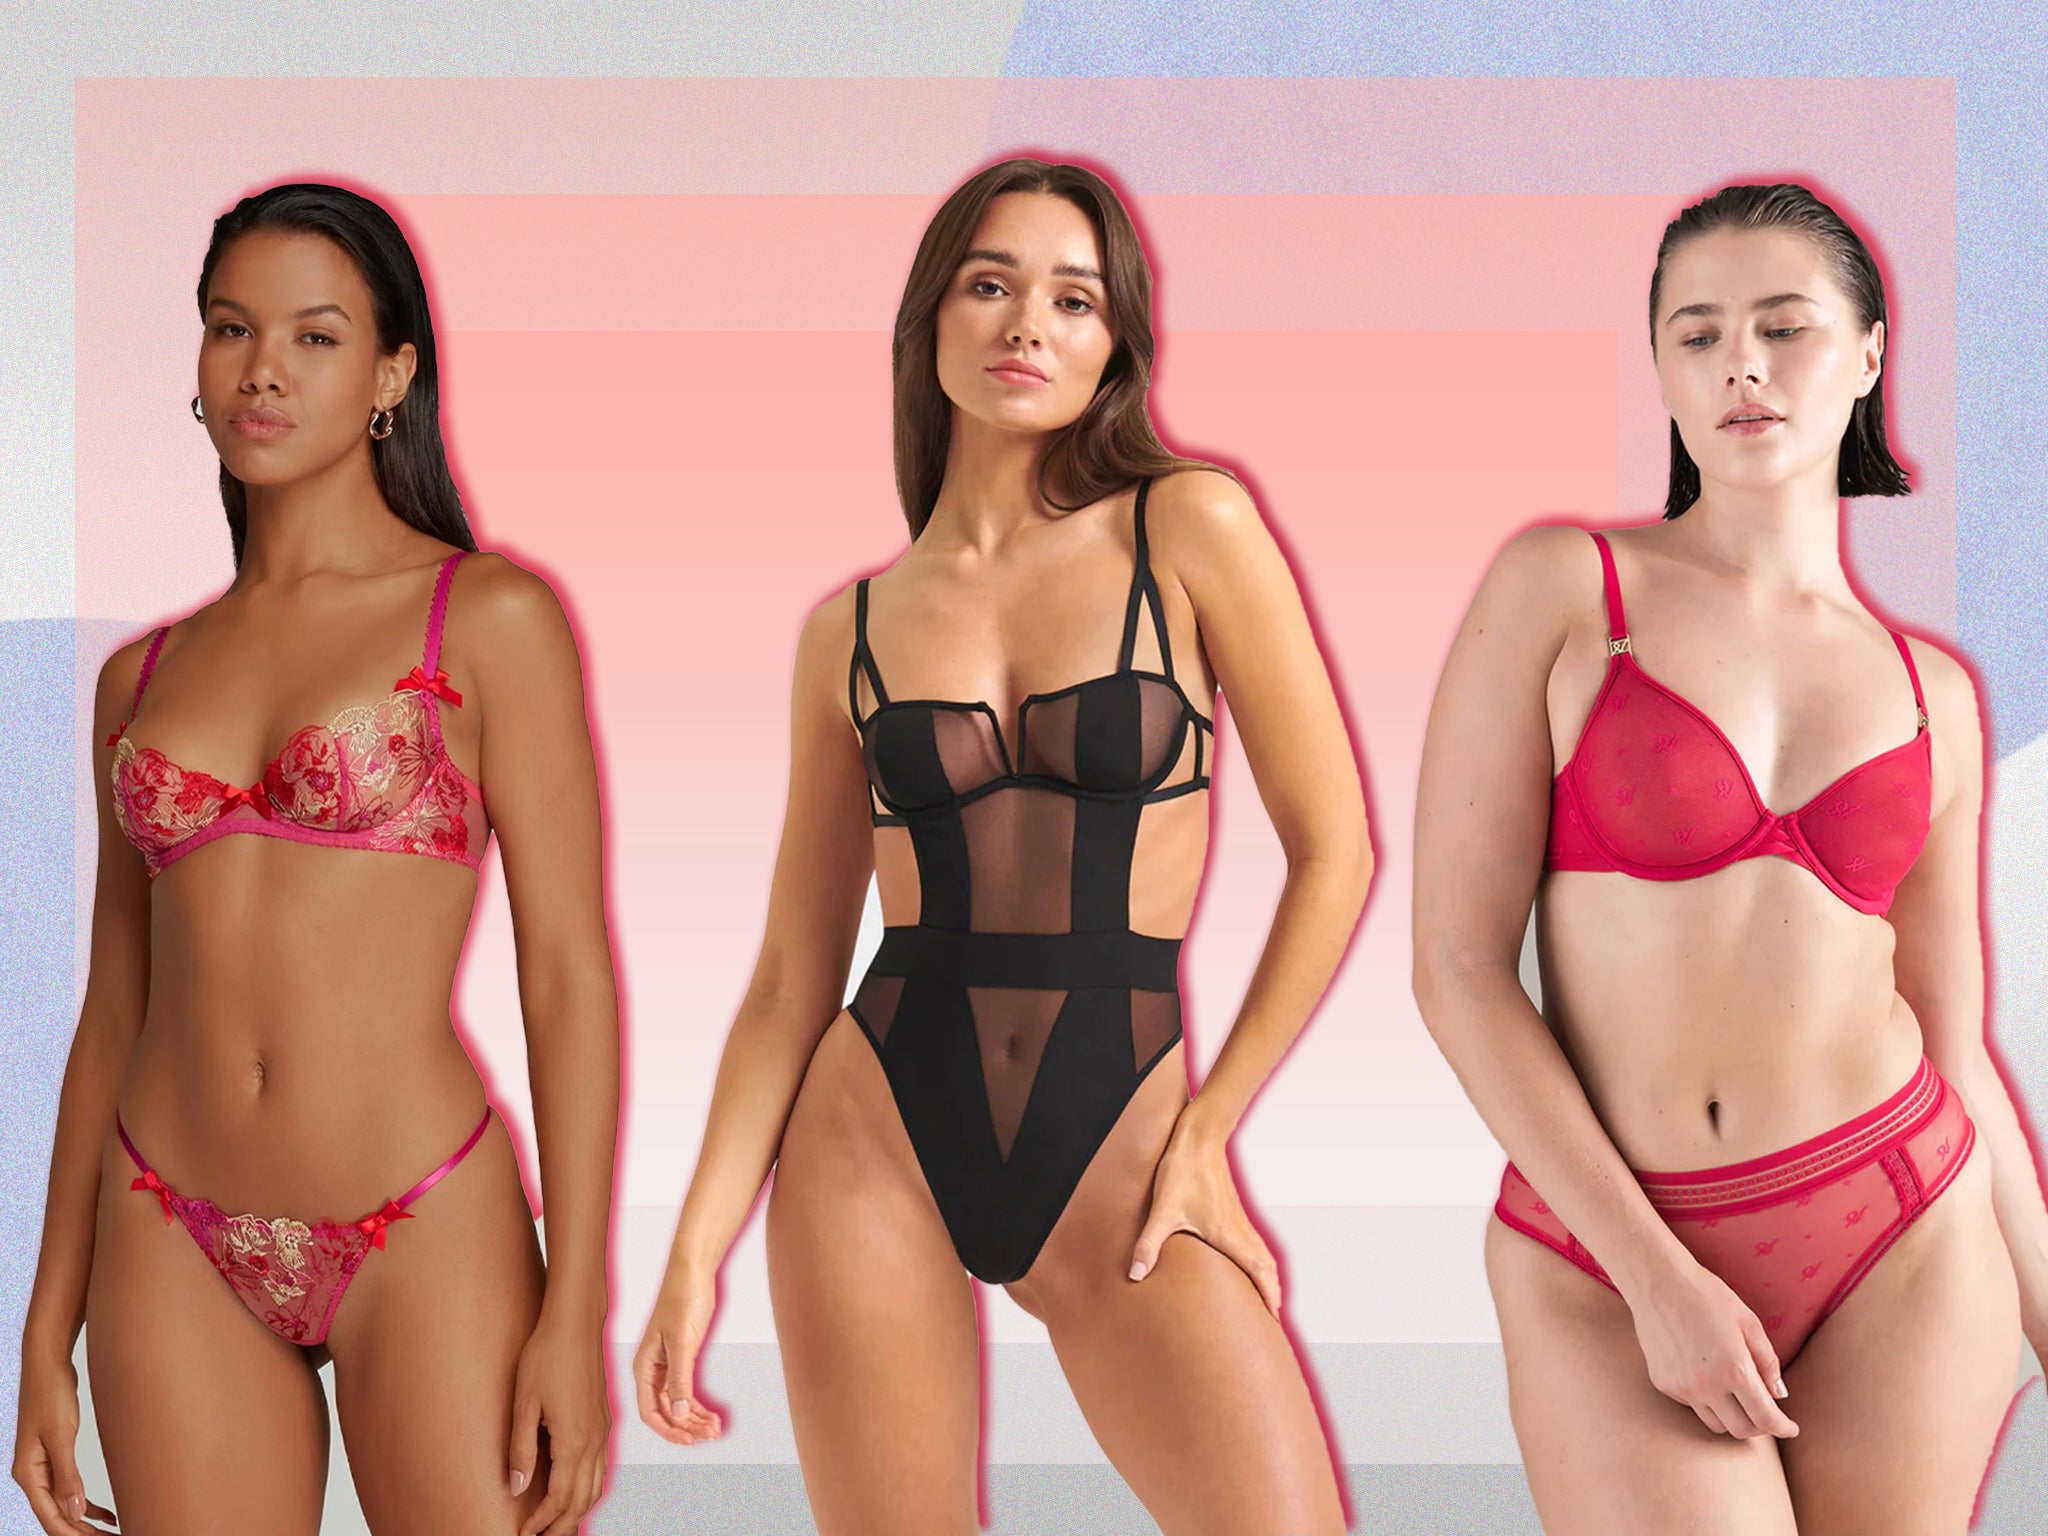 Best women's lingerie sets 2023: From red styles to mesh | The Independent